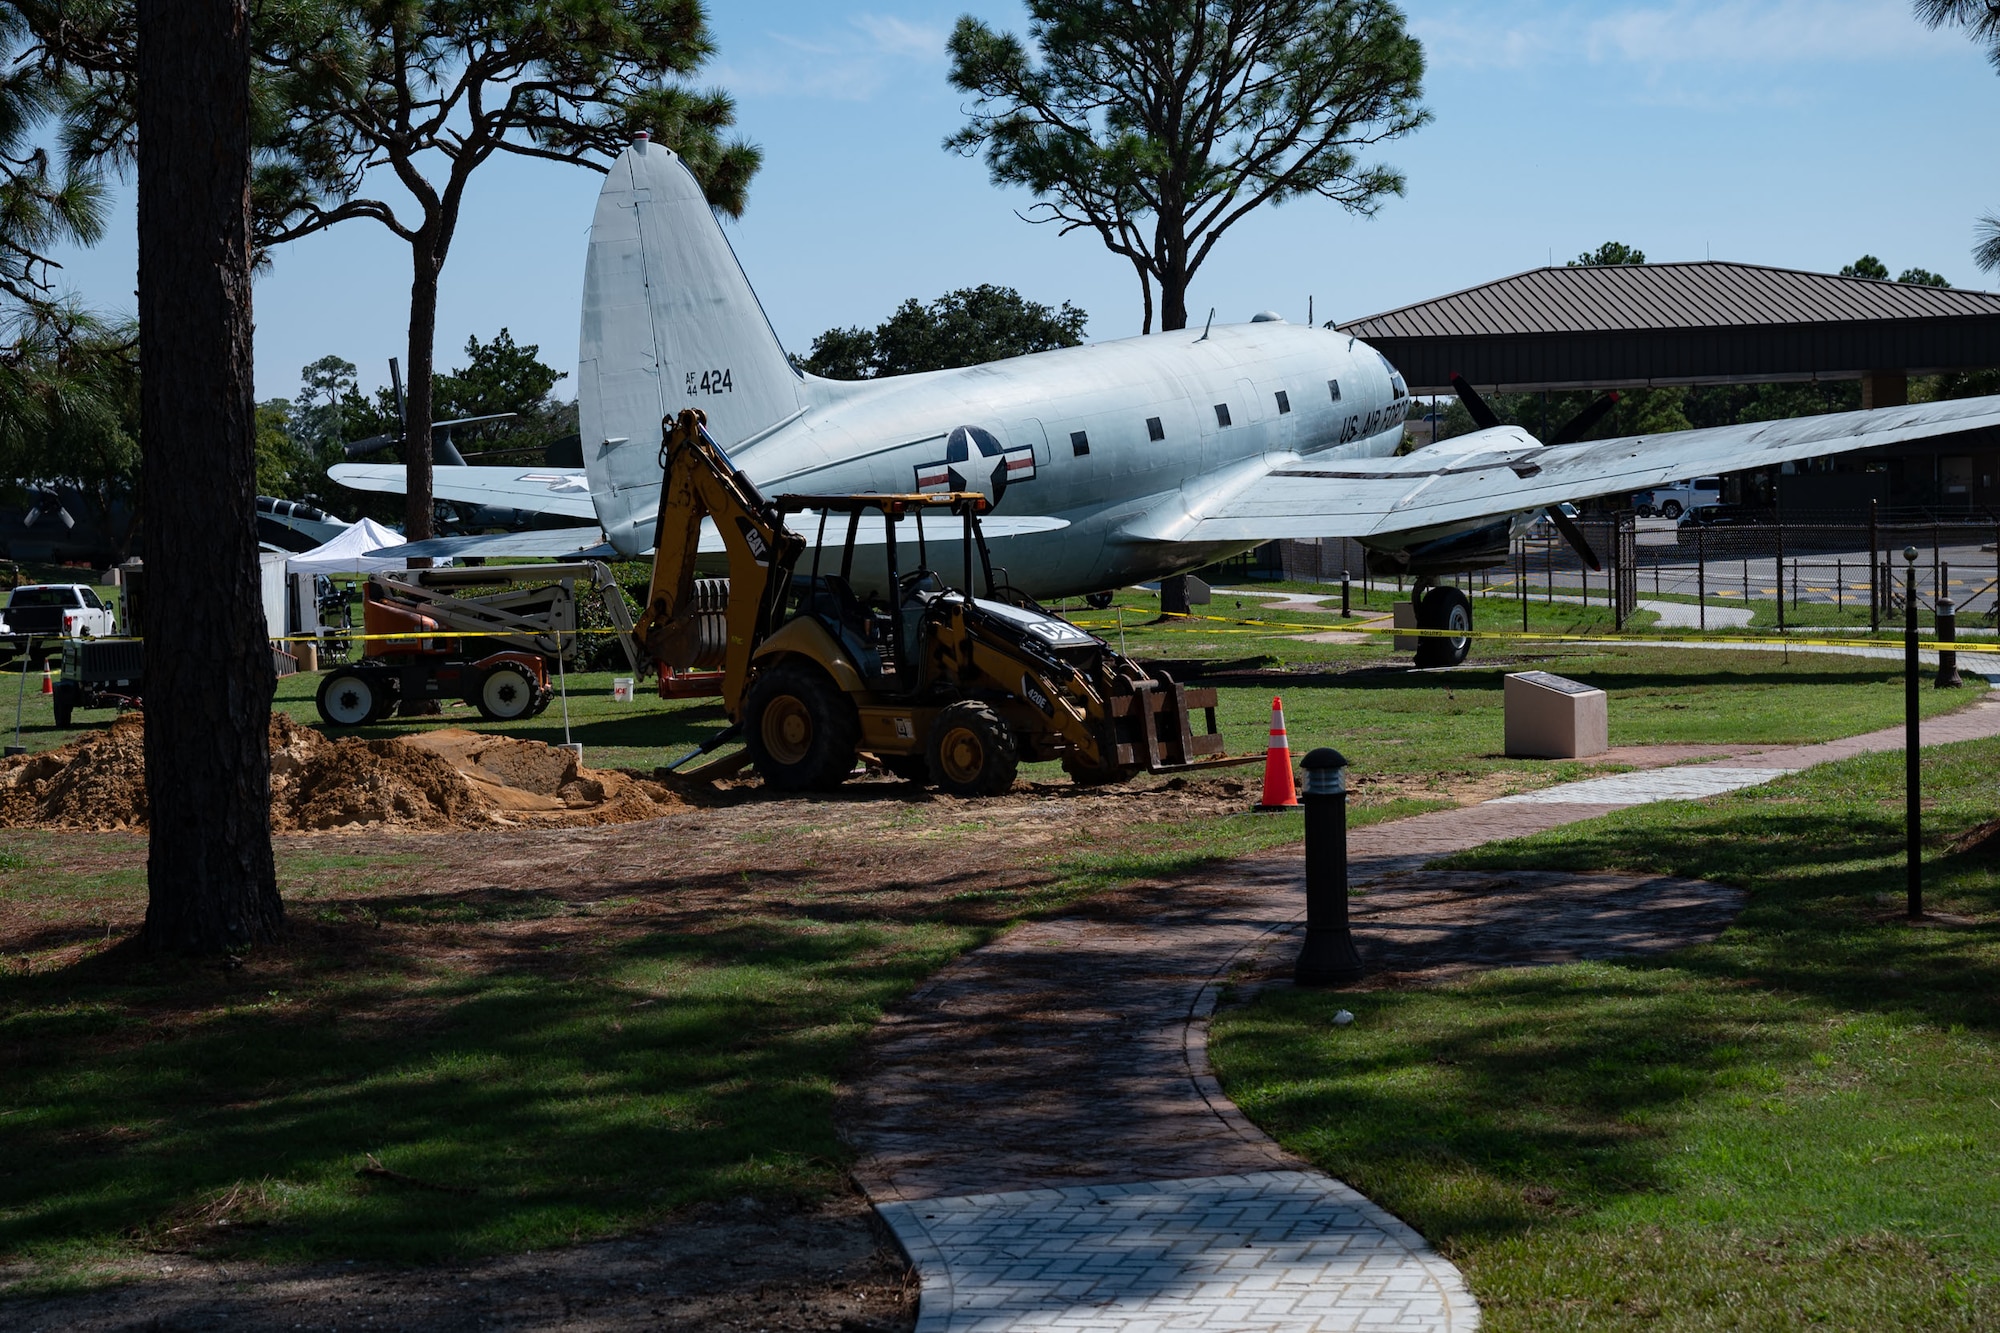 For the first time in more than 20 years, Hurlburt Field plans to open its airpark to the general public in spring 2024 - allowing visitors to see the aircraft first-hand and learn more about the history of Air Force Special Operations Command.